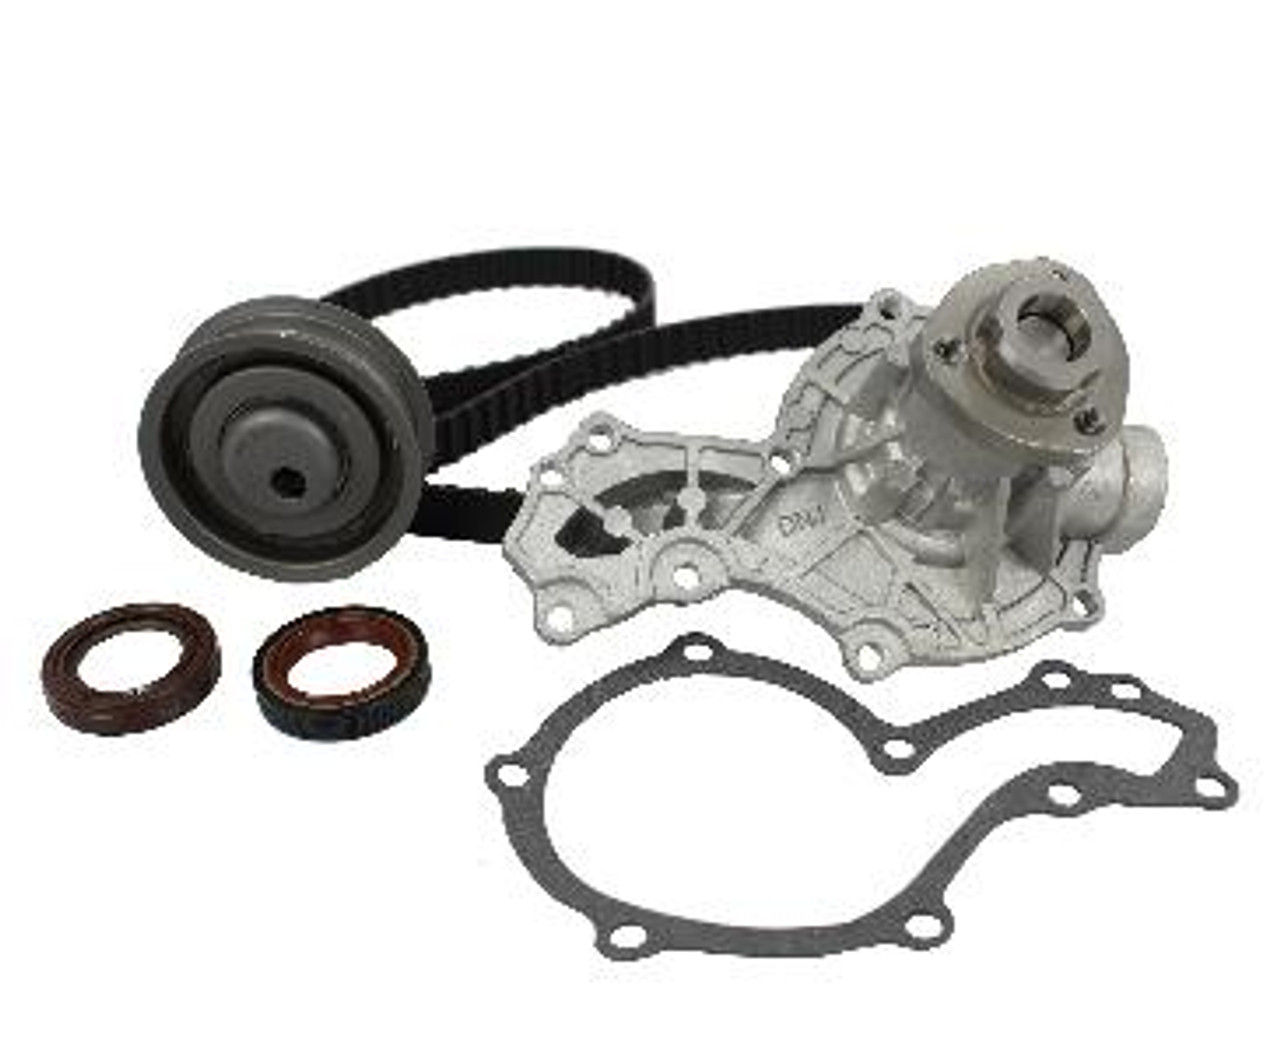 1996 Volkswagen Golf 2.0L Engine Timing Belt Kit with Water Pump TBK803WP -11